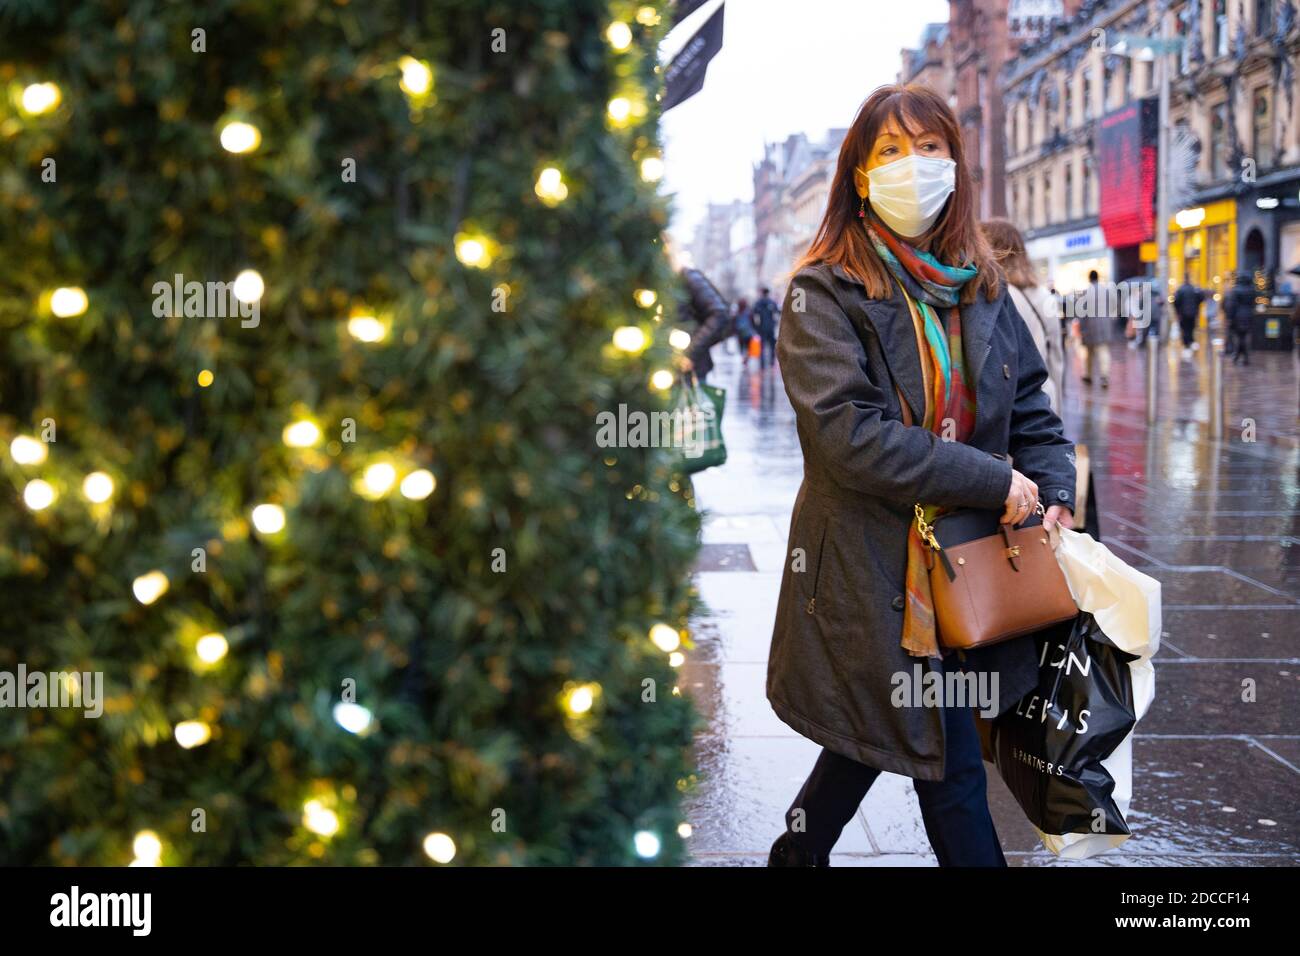 Glasgow, Scotland, UK. 20 November 2020. On the day when the severest level 4 lockdown will be imposed at 6pm, shoppers are out on the streets of Glasgow doing last minute Christmas shopping before the shops close for 3 weeks. Pictured; Woman shopping on Buchanan Street.  Iain Masterton/Alamy Live News Stock Photo